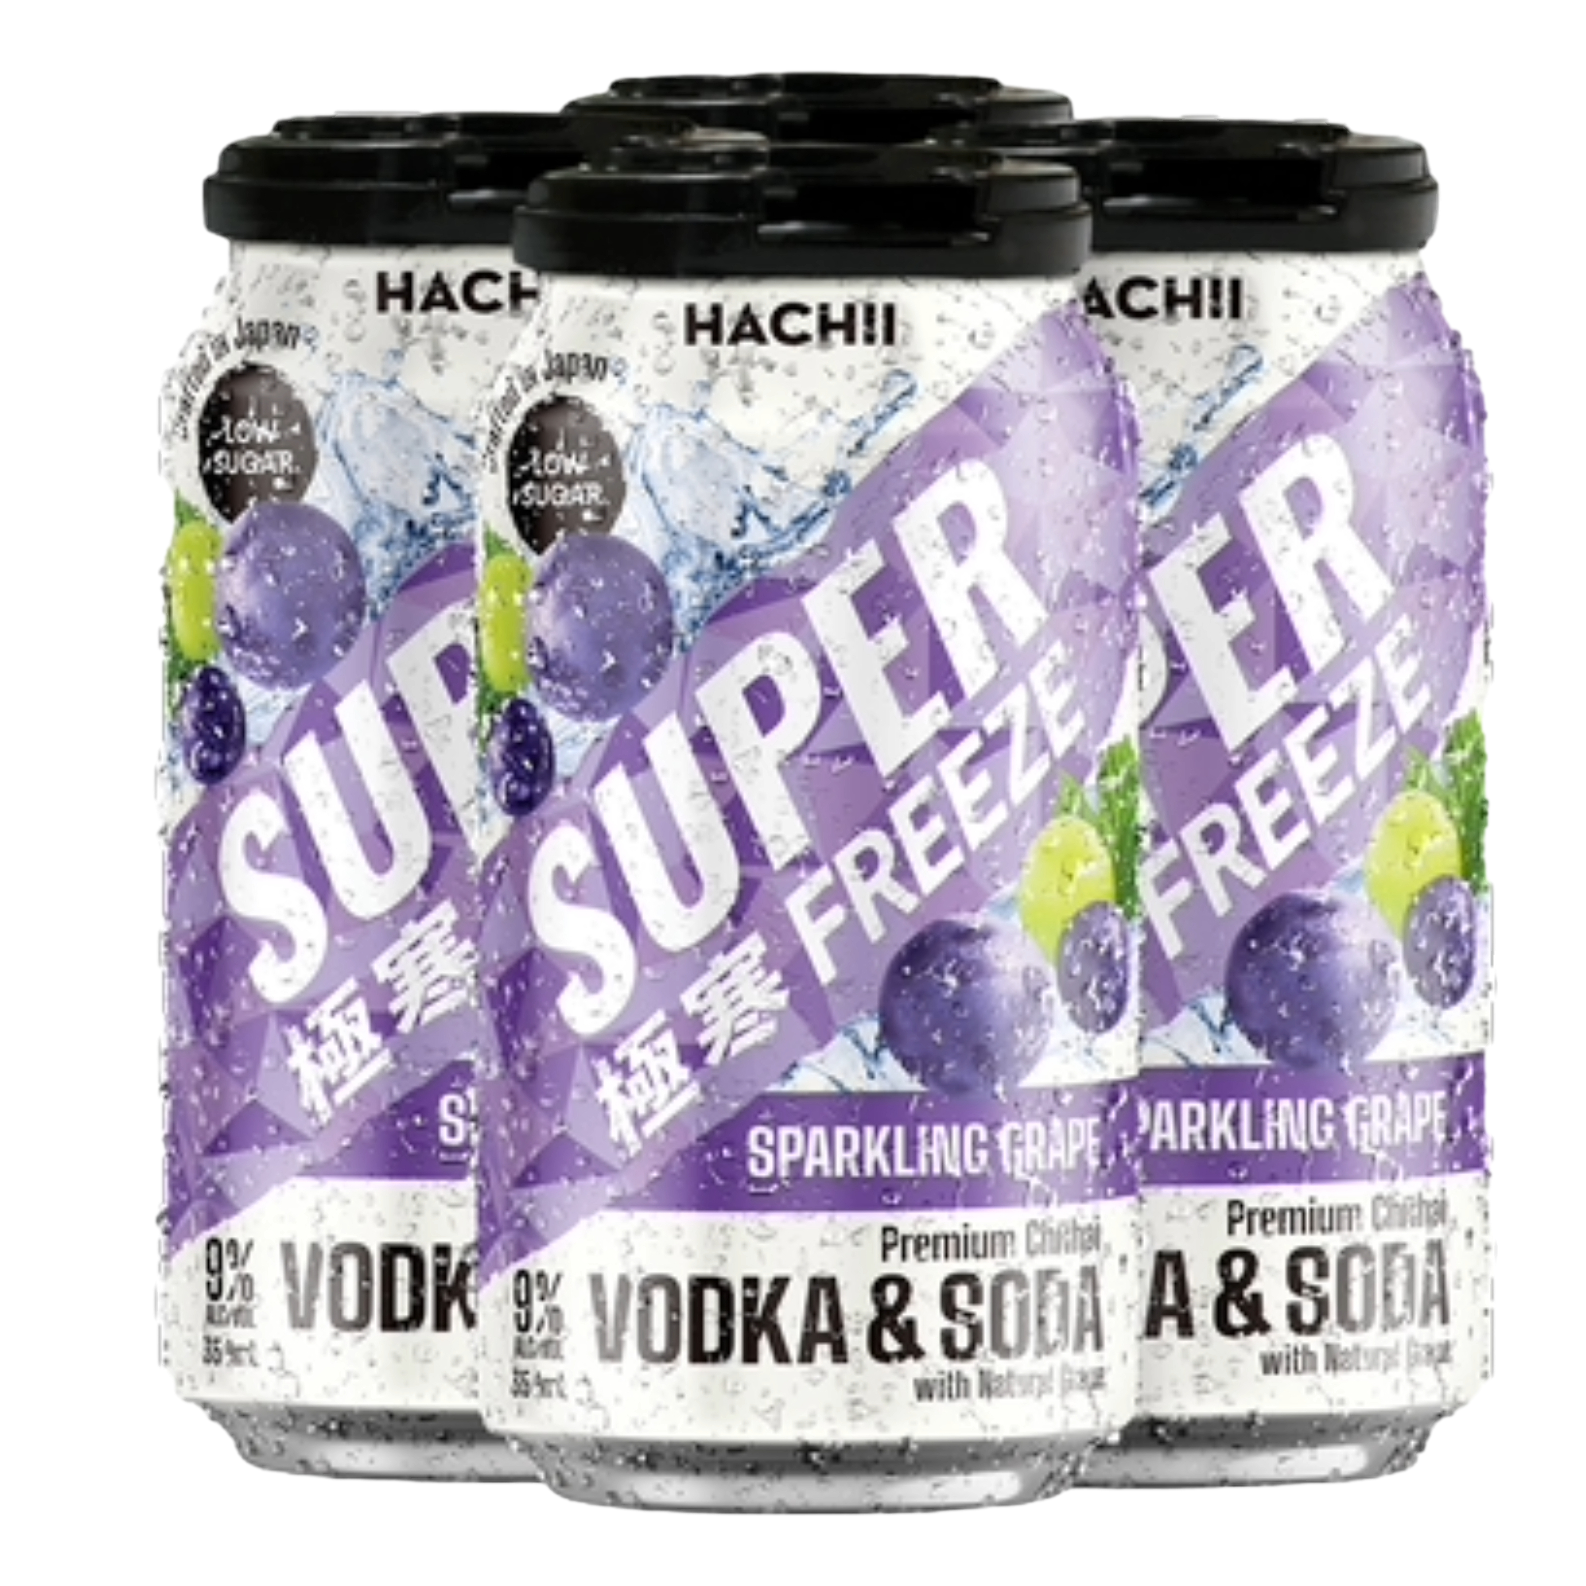 Hachii Super Freeze Sparkling Grape 9% 350ml Can 4 Pack